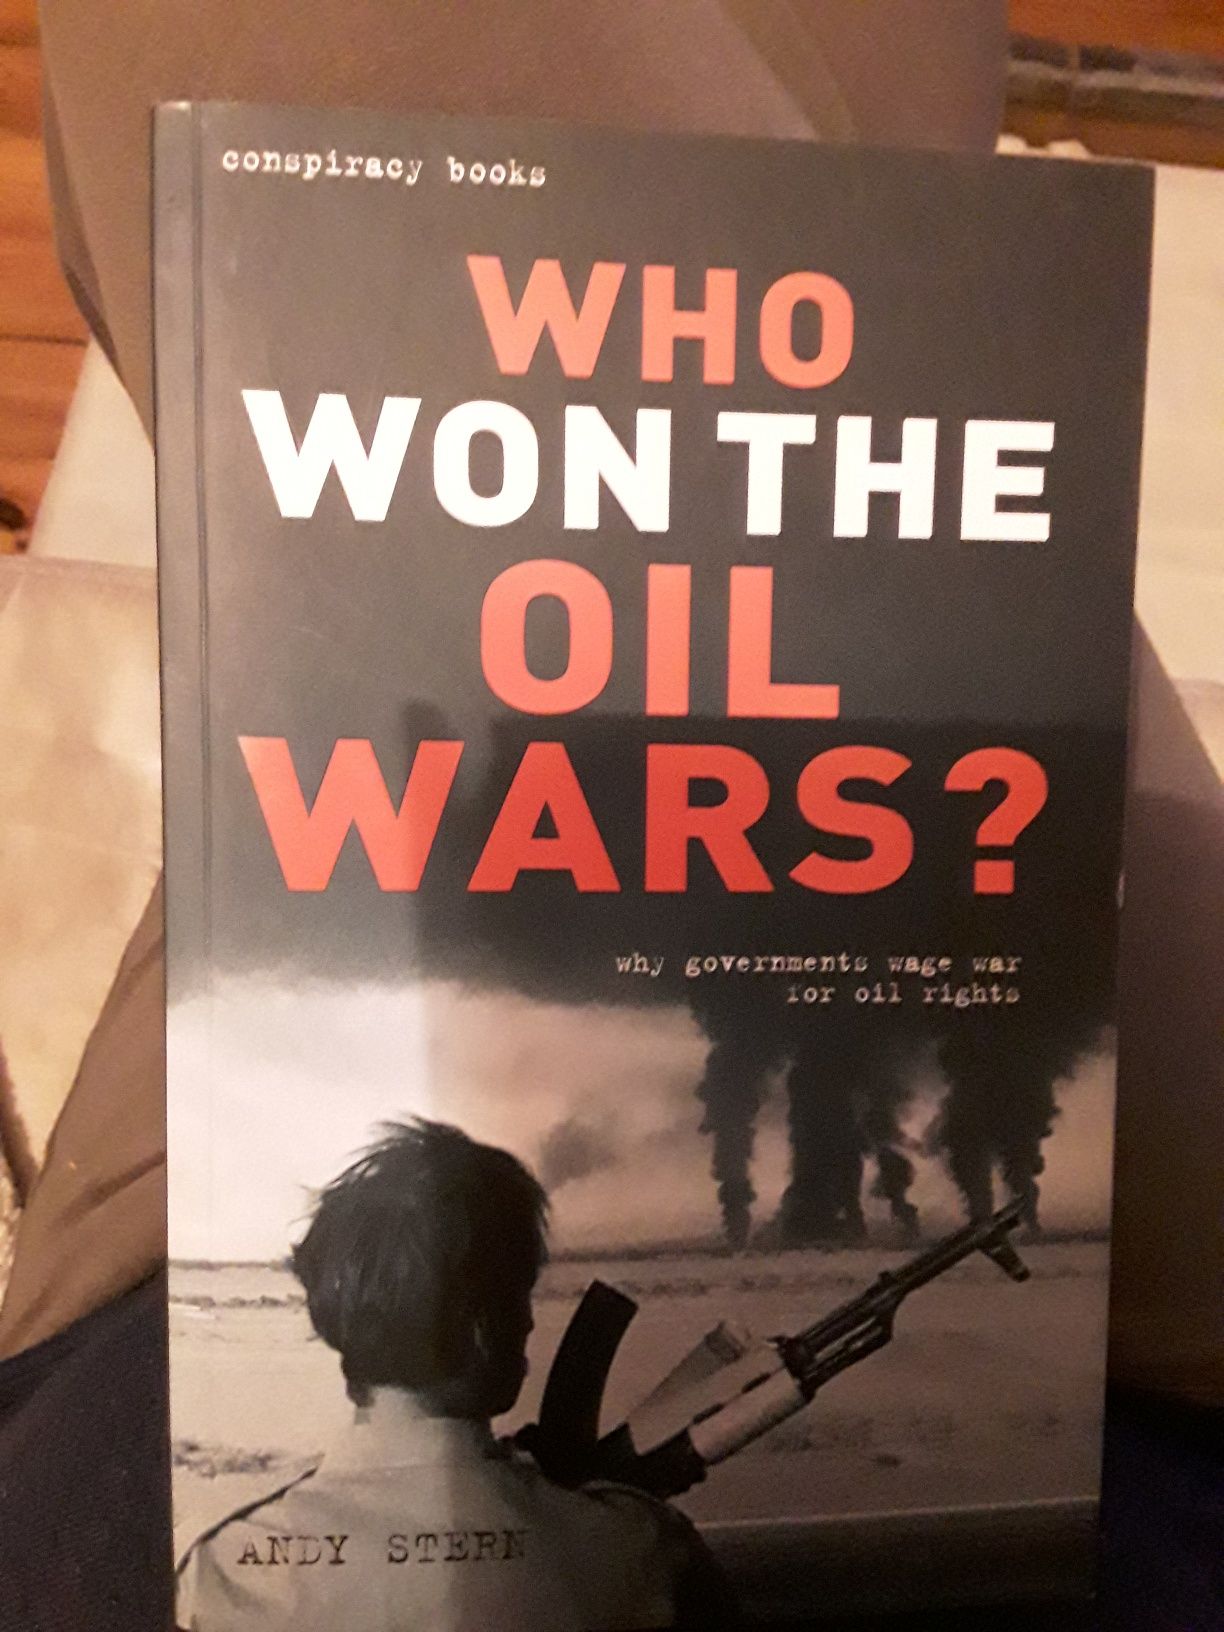 Who won the oil wars?